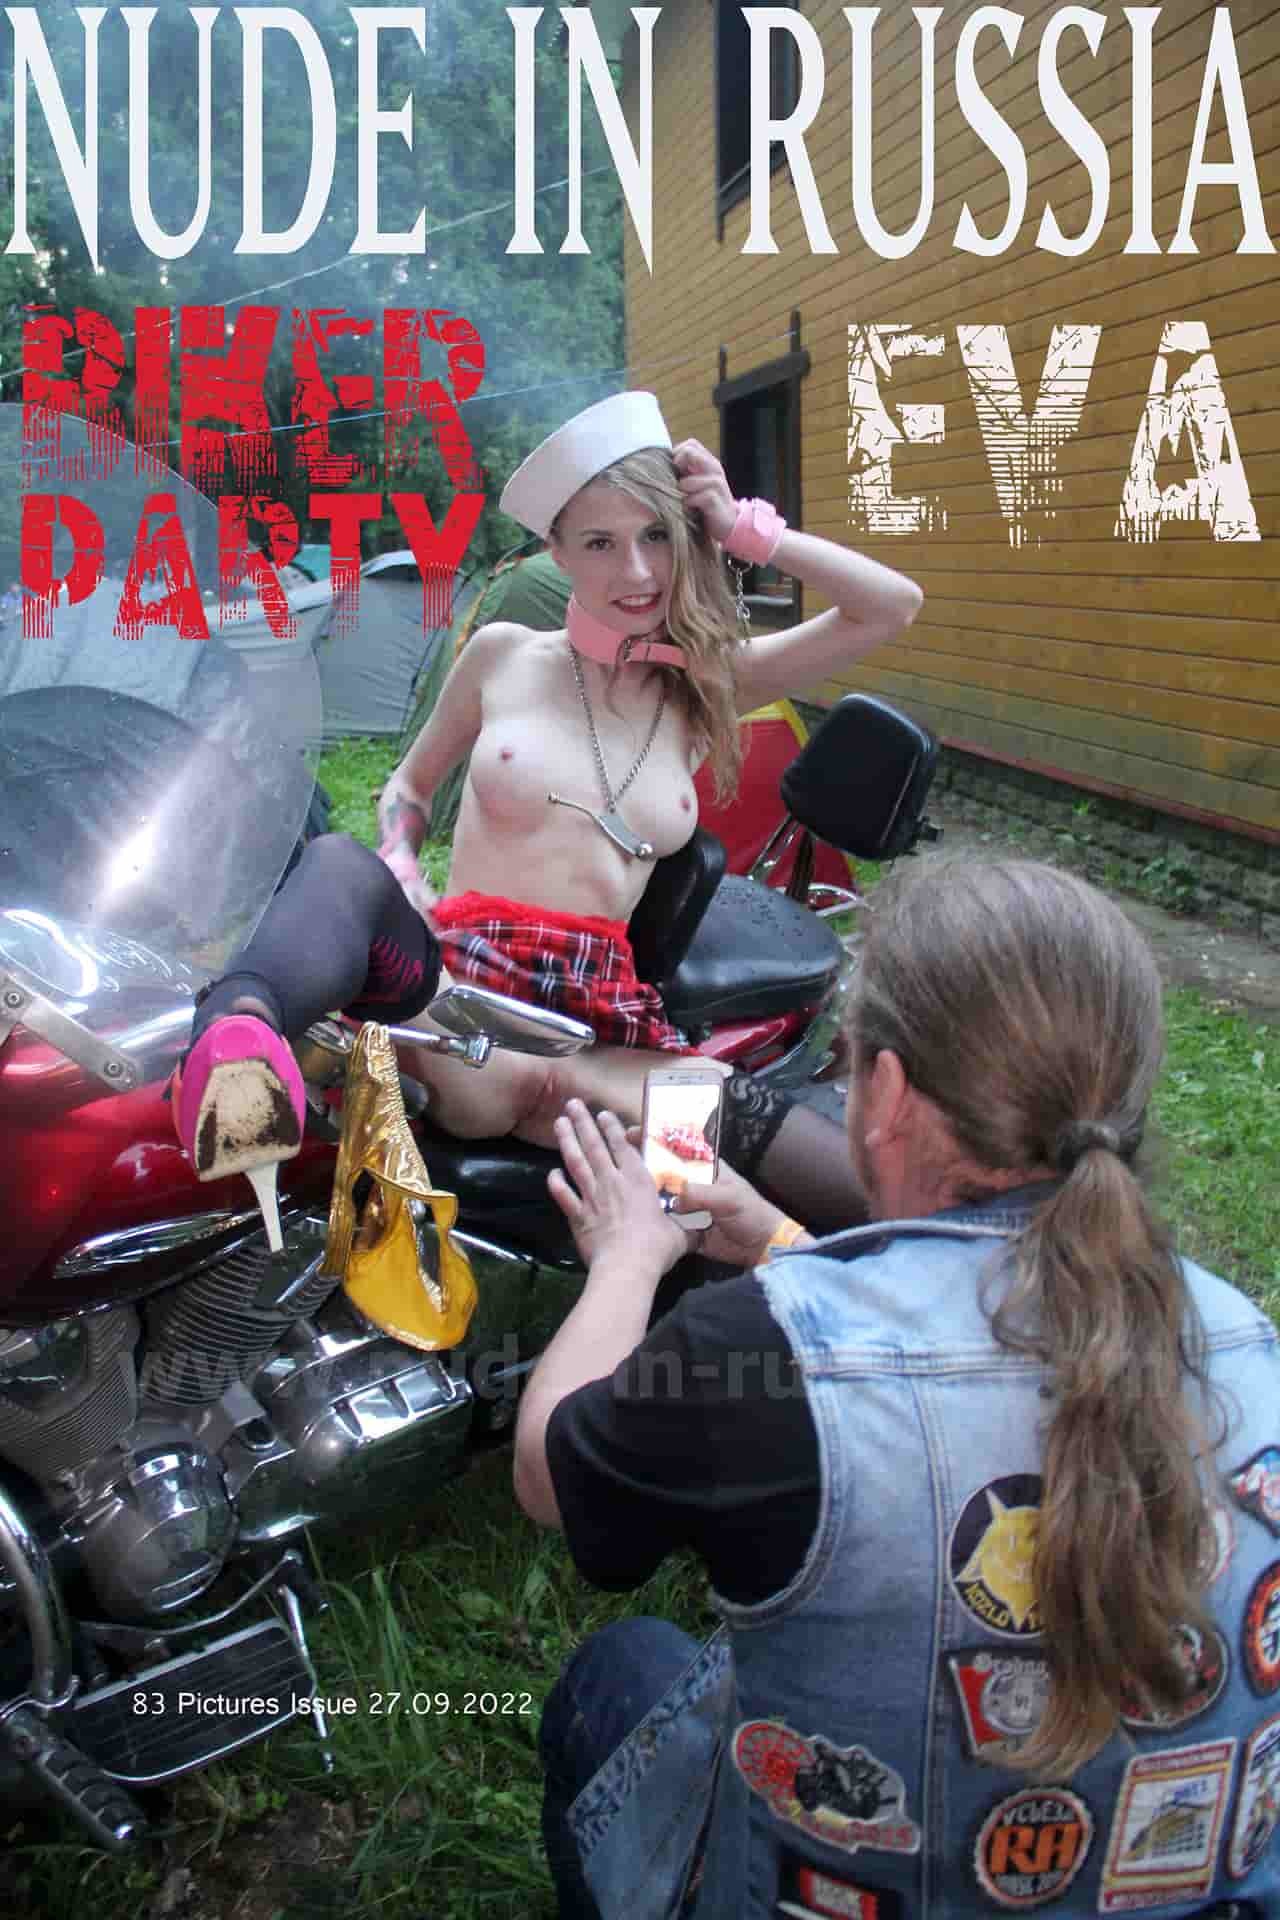 Nude girls at Russian hippie party - Eva 2 - Biker party